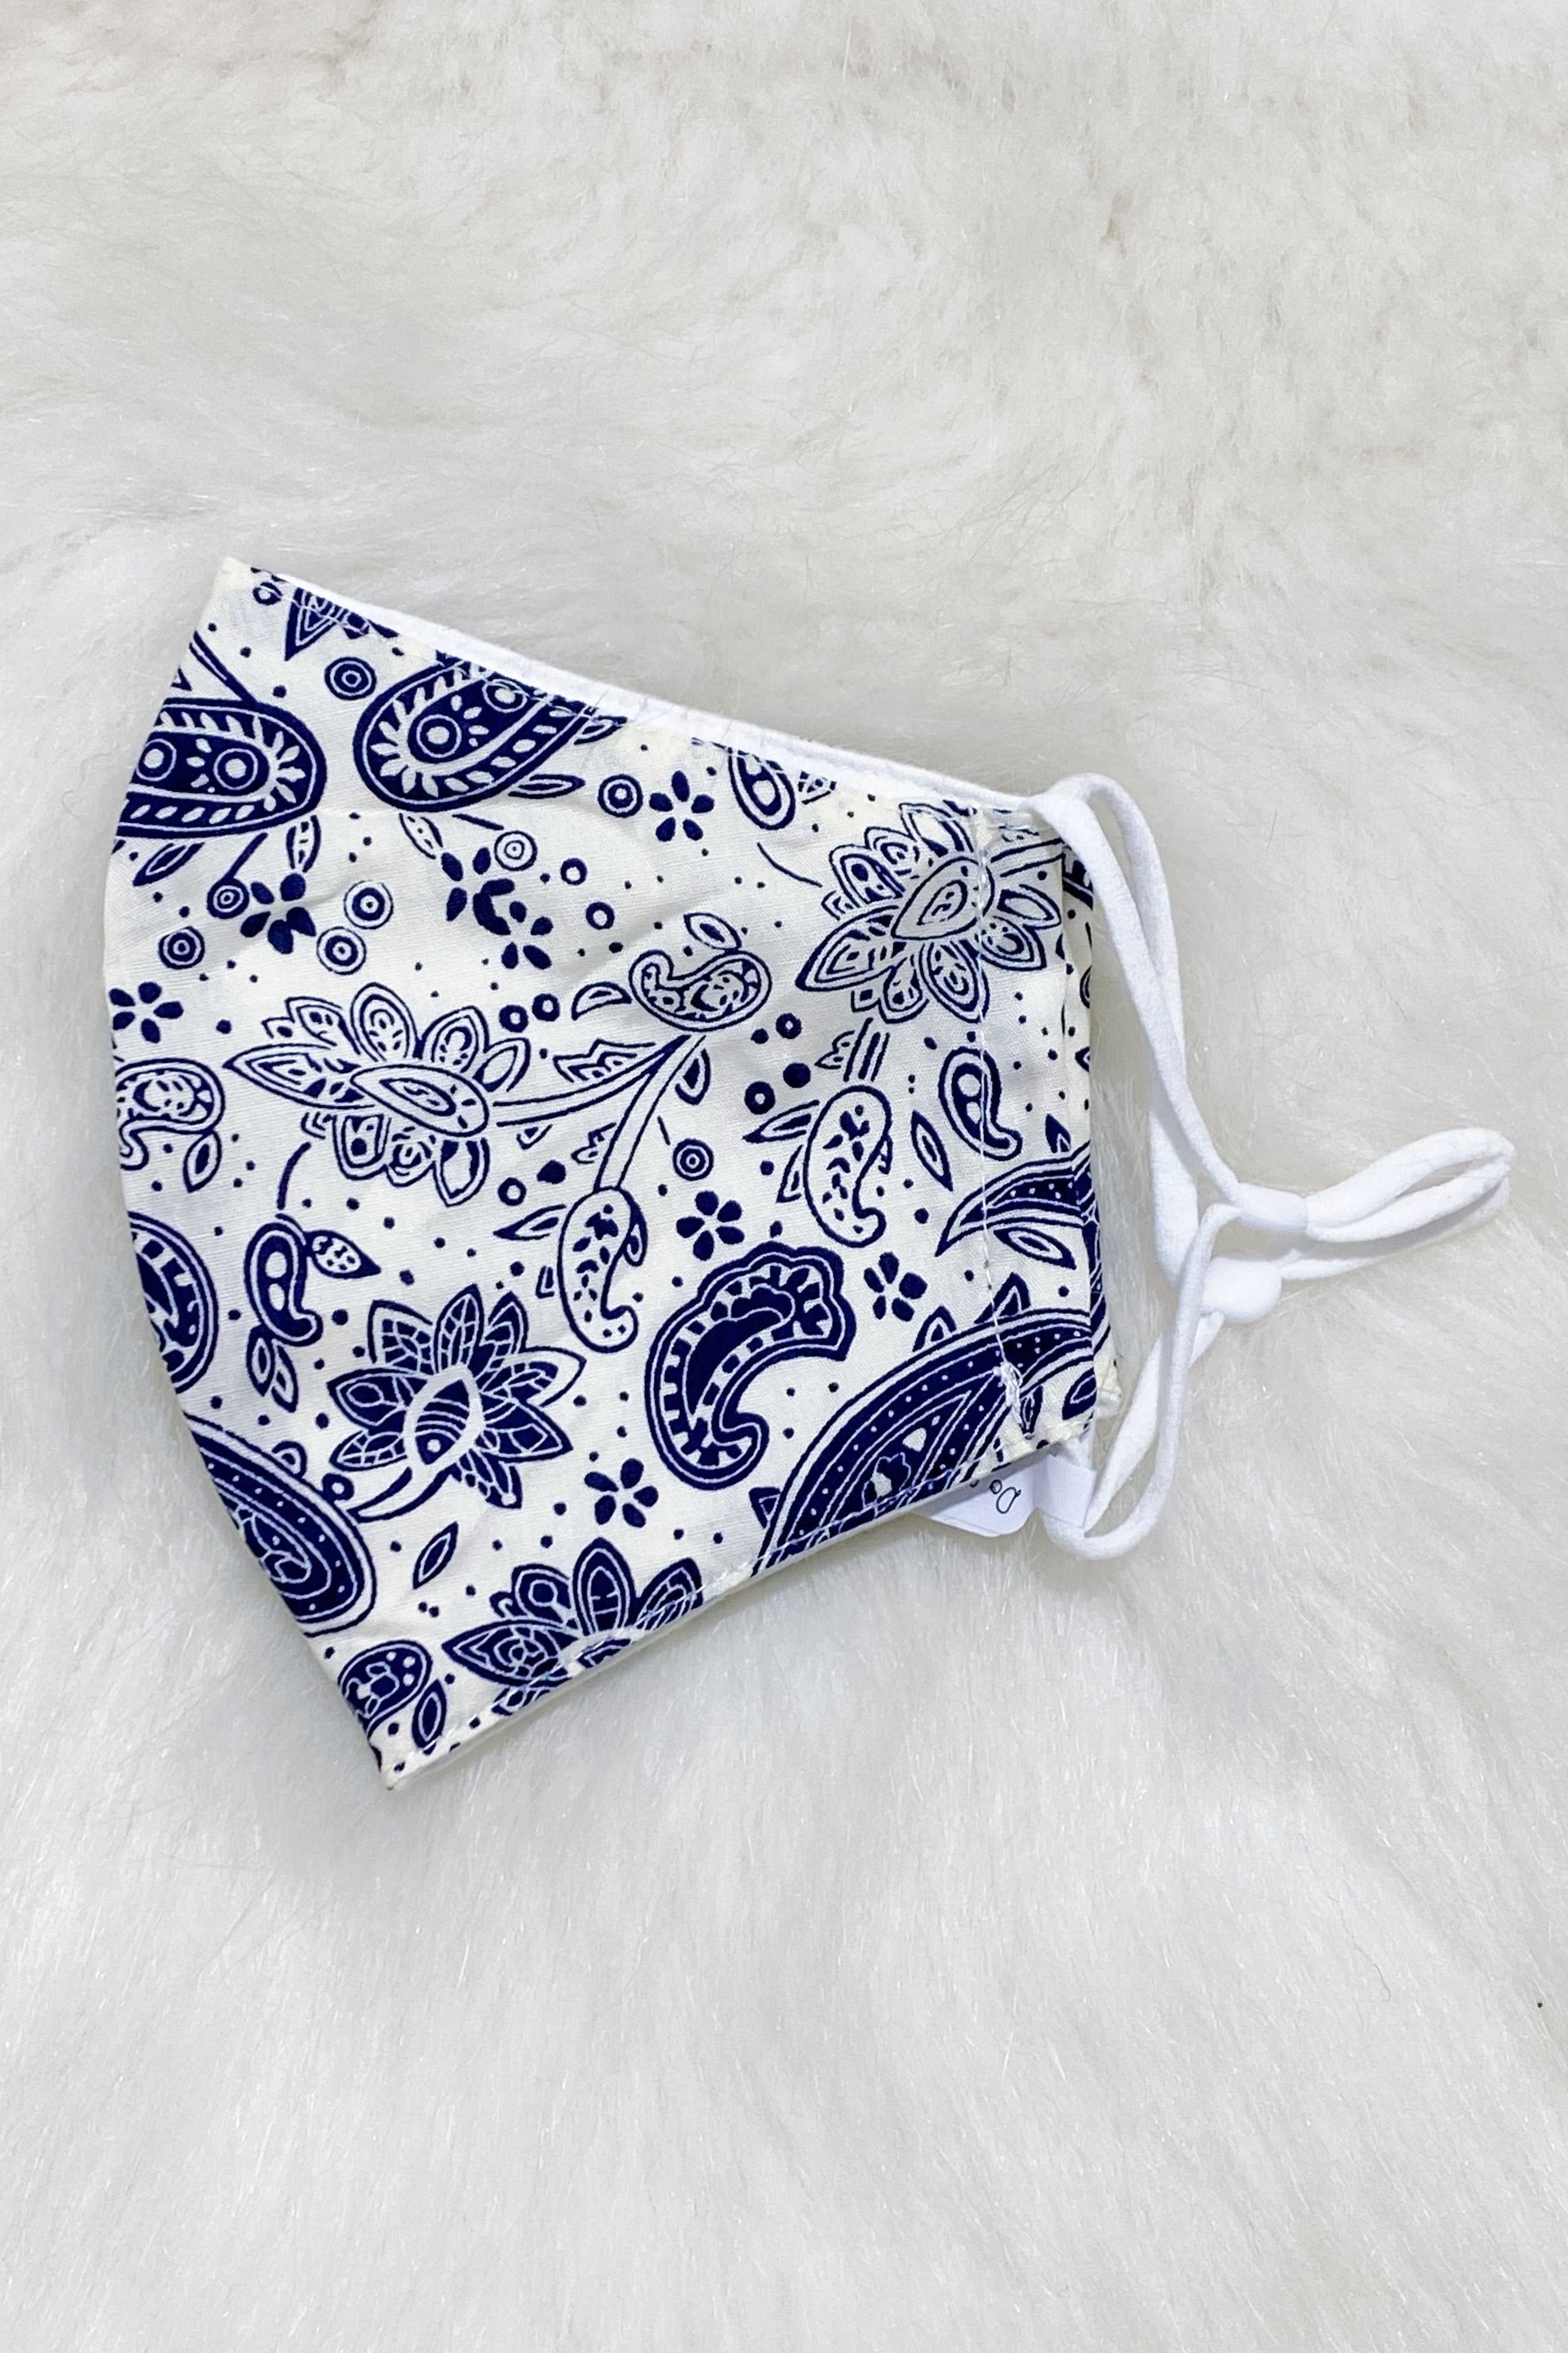 Paisley Fabric Mask in White Ellisonyoung.com